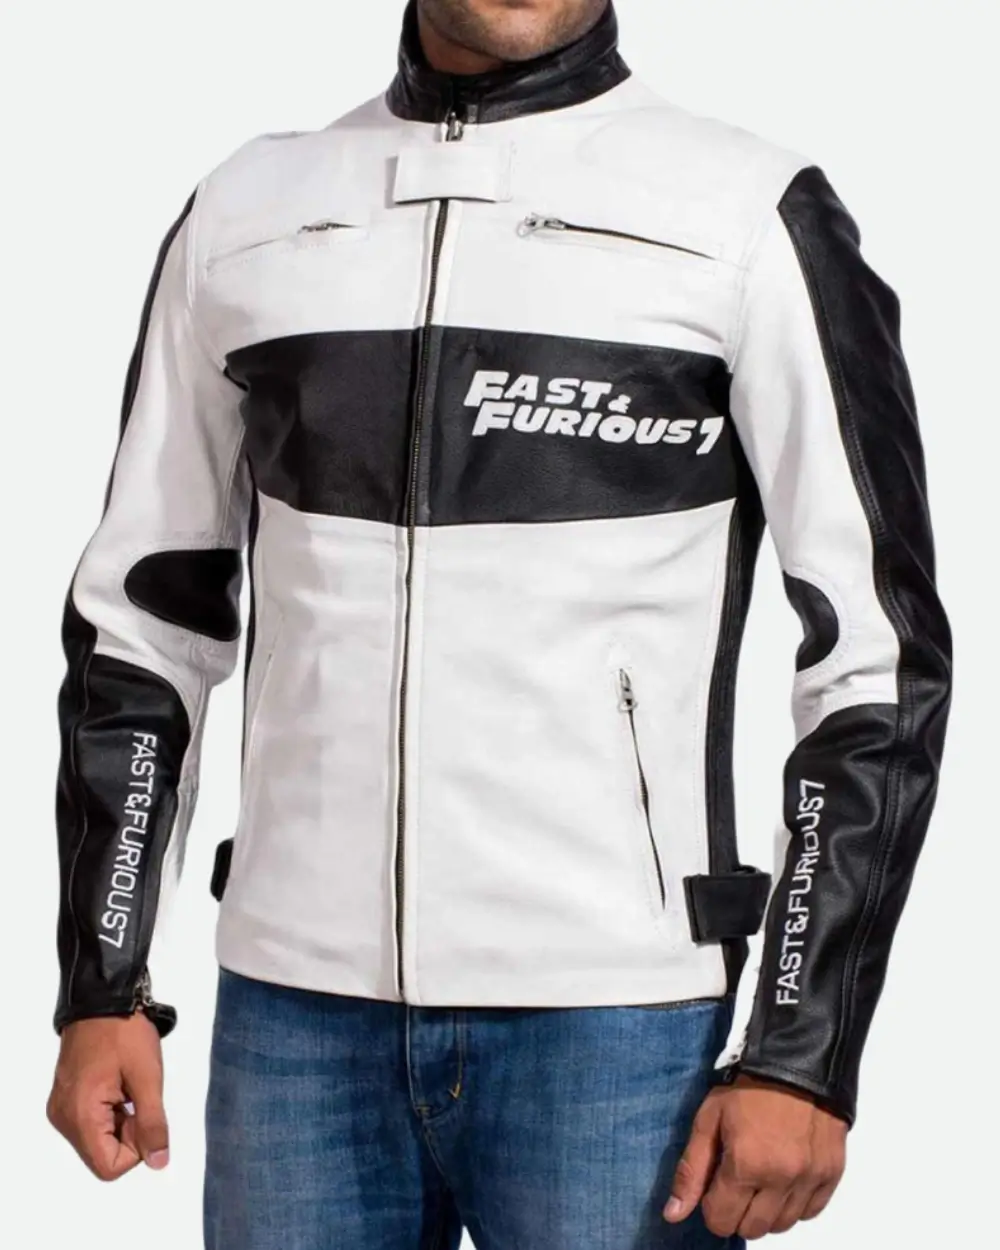 Vin Diesel Fast And Furious 7 Motorcycle White Leather Jacket